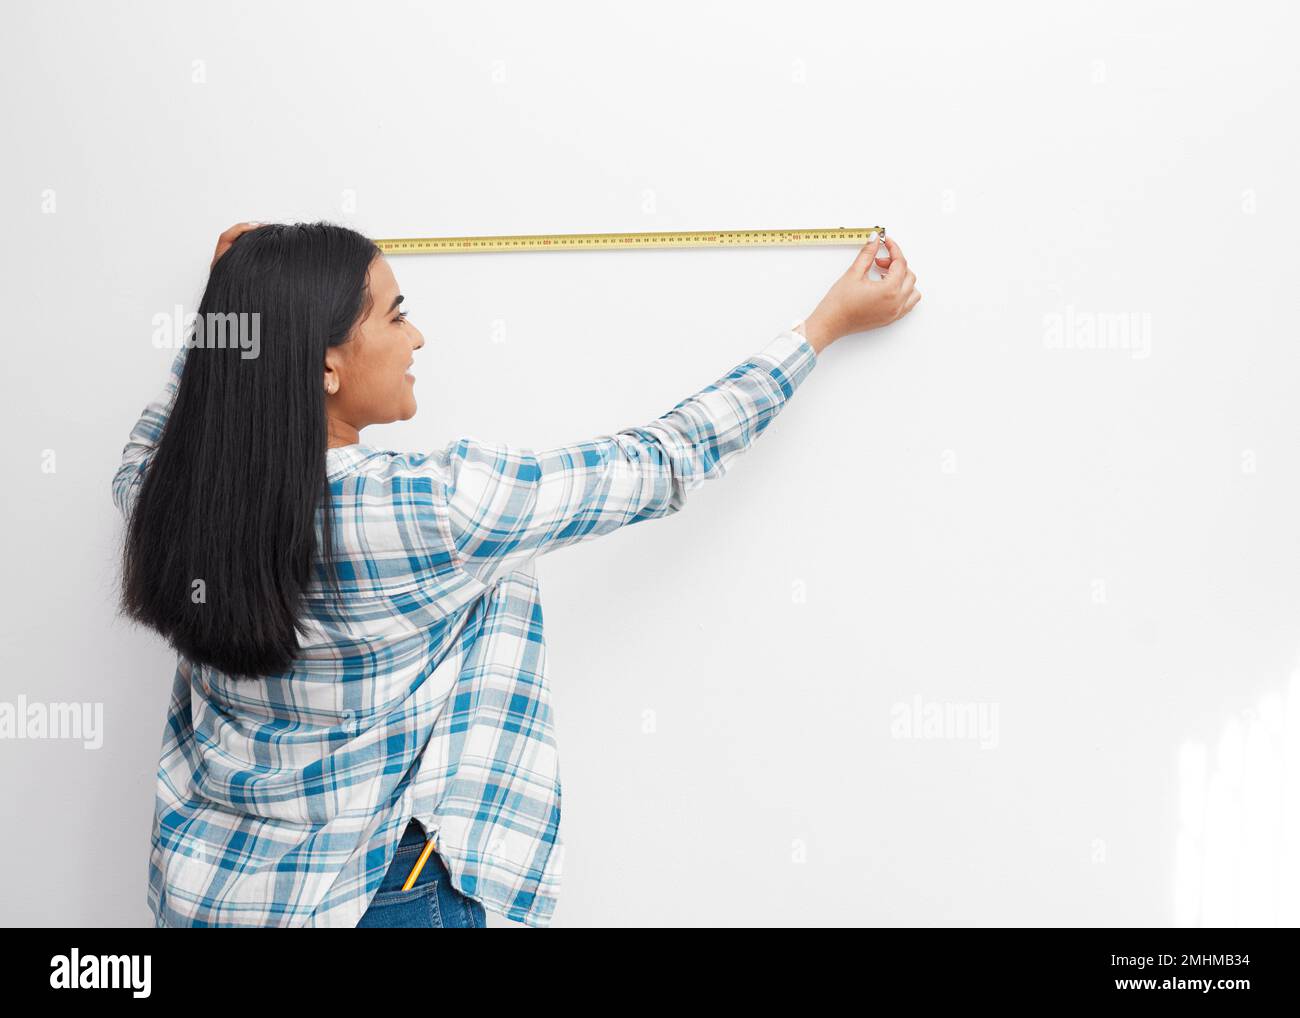 An Indian woman measures against the wall using measuring tape doing home DIY Stock Photo